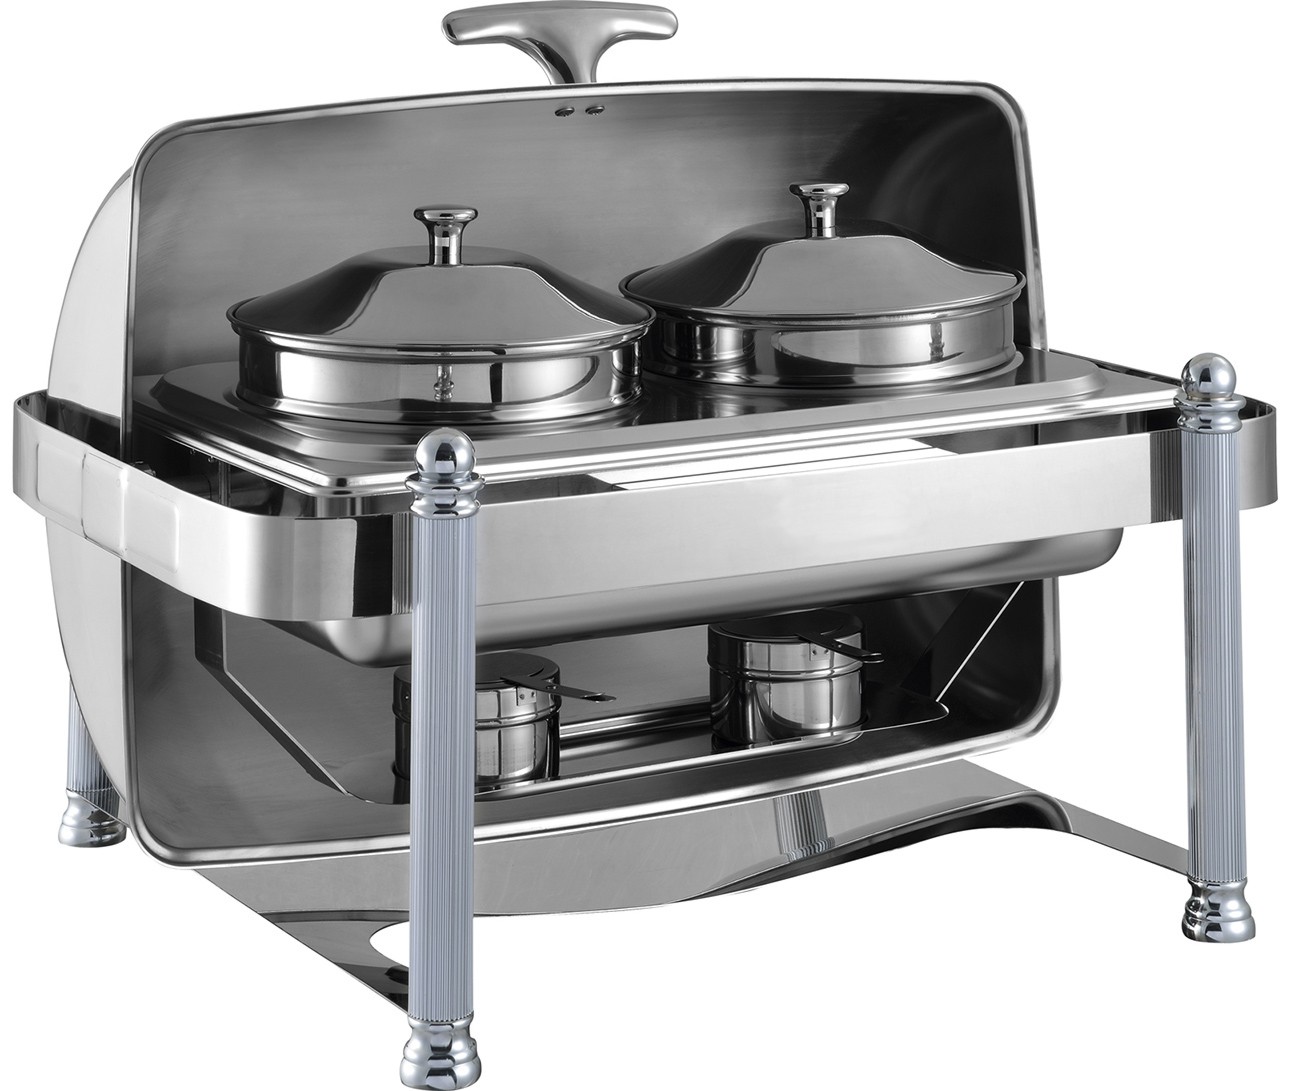 GRT-6508 Stainless Steel Rectangular Chafing Dish 9L for Soup